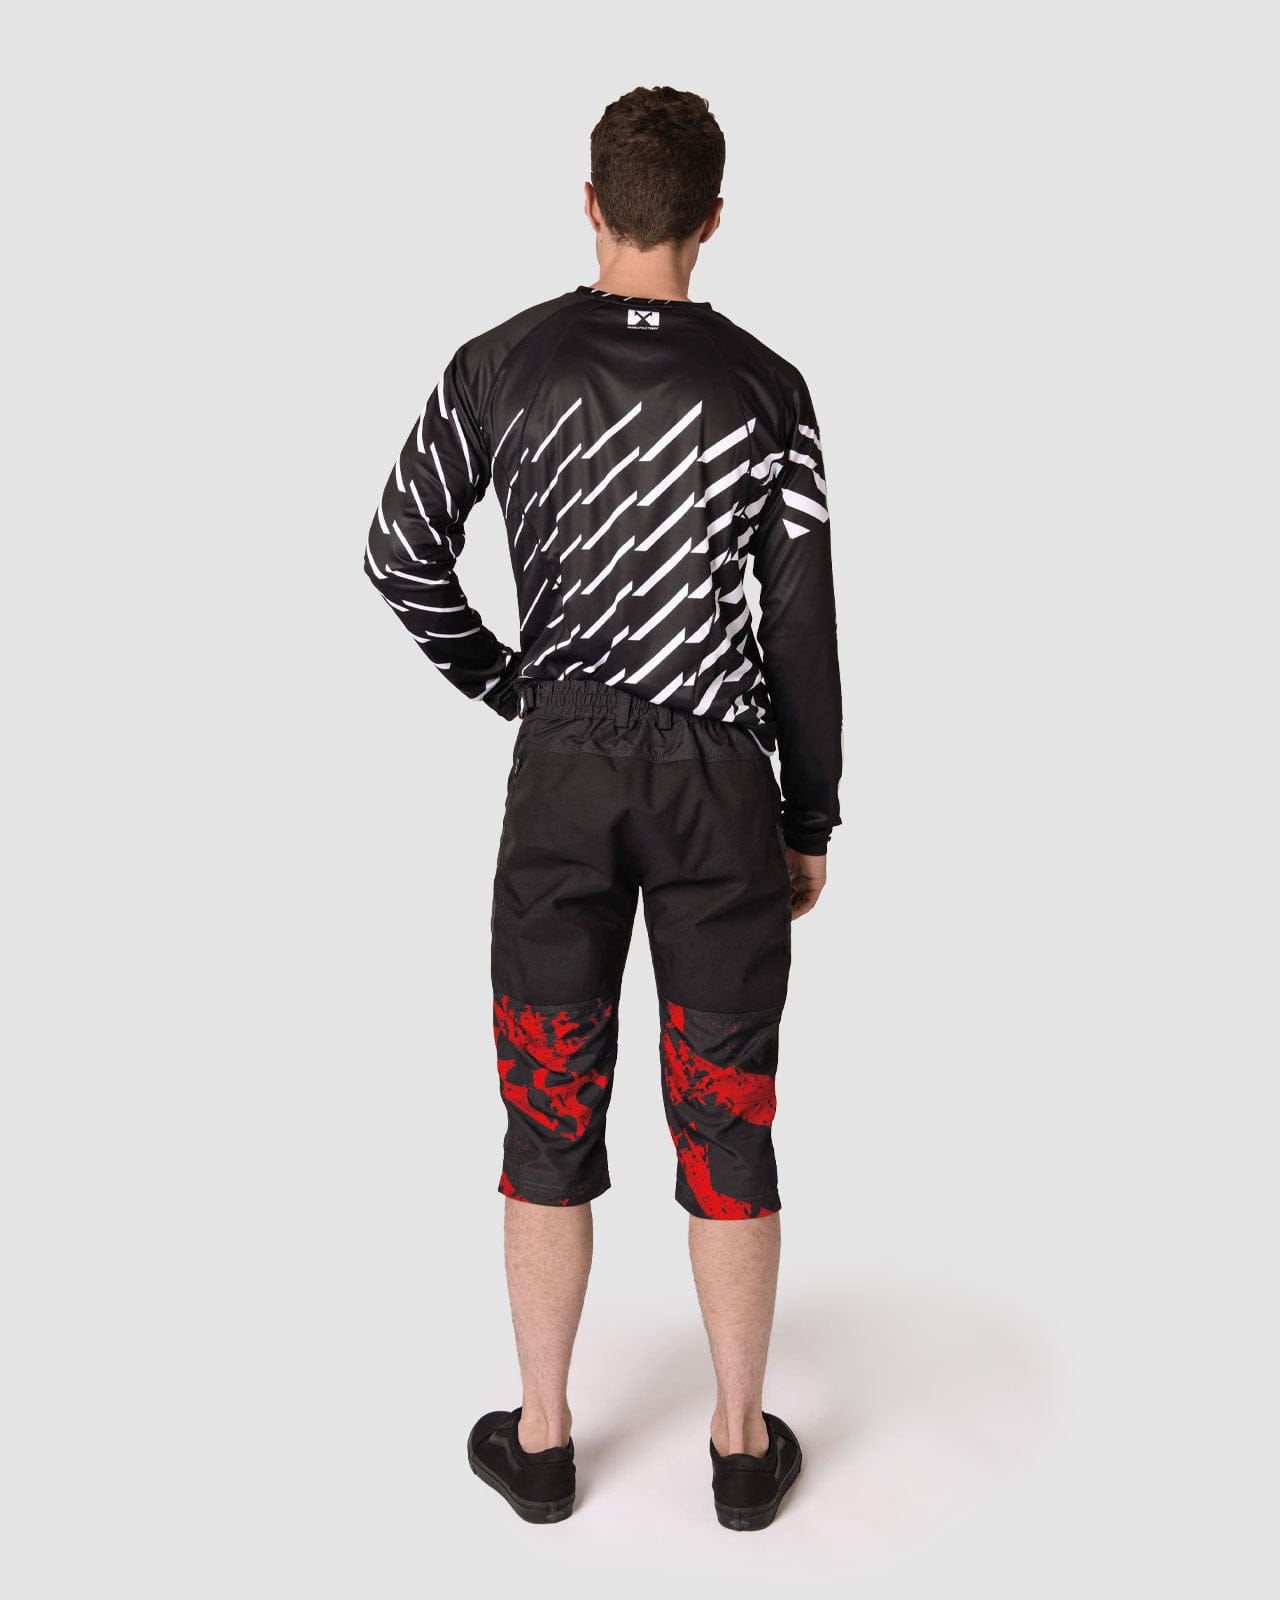 Manufactory Apparel Physical product Dynamx MX Series Short